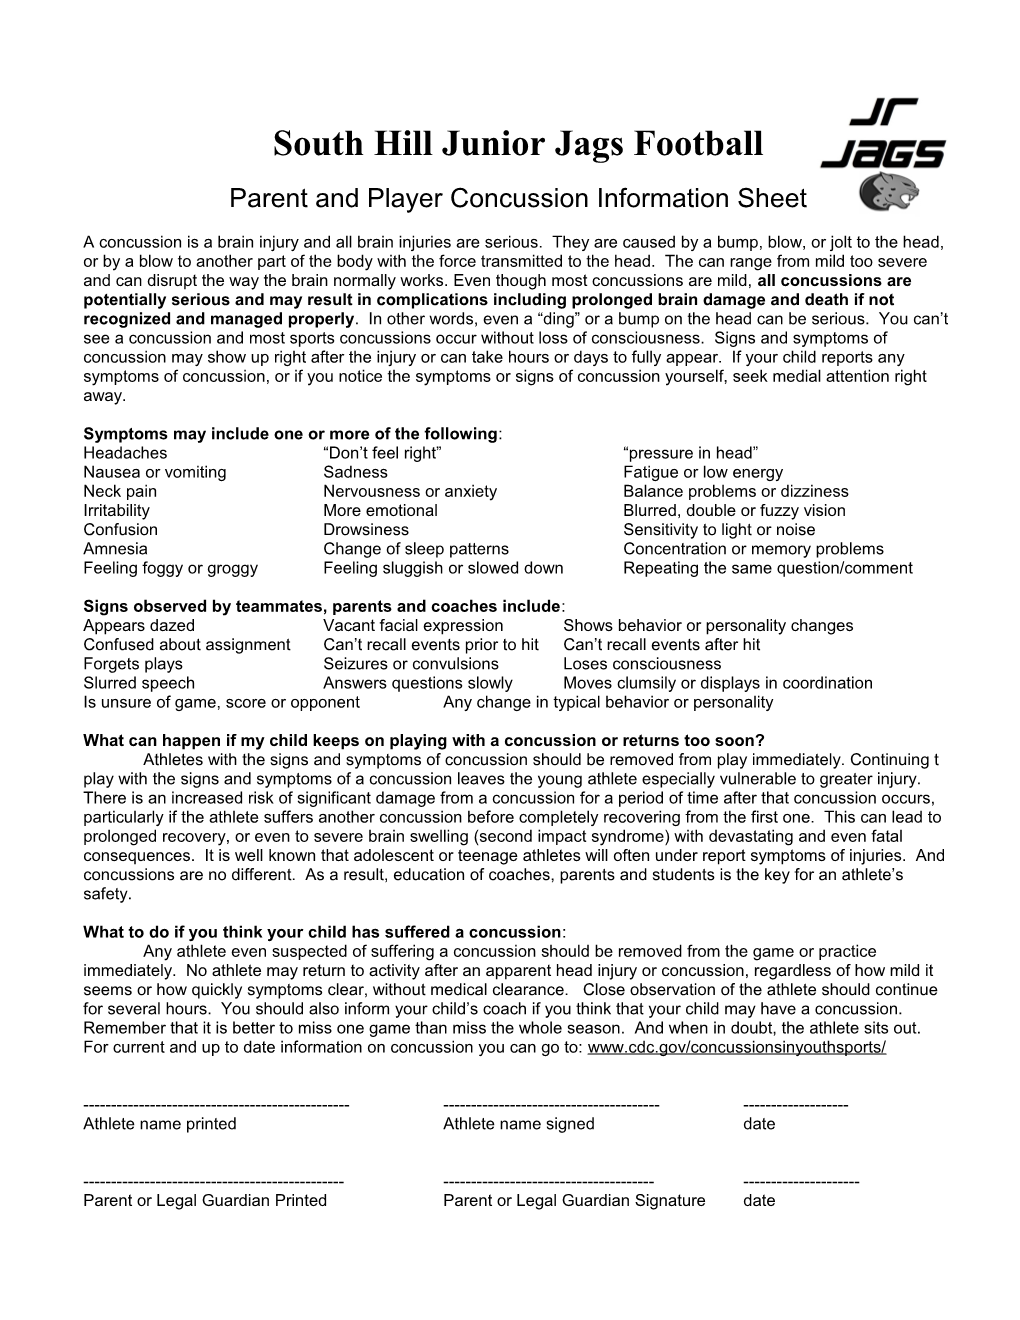 Parent and Player Concussion Information Sheet